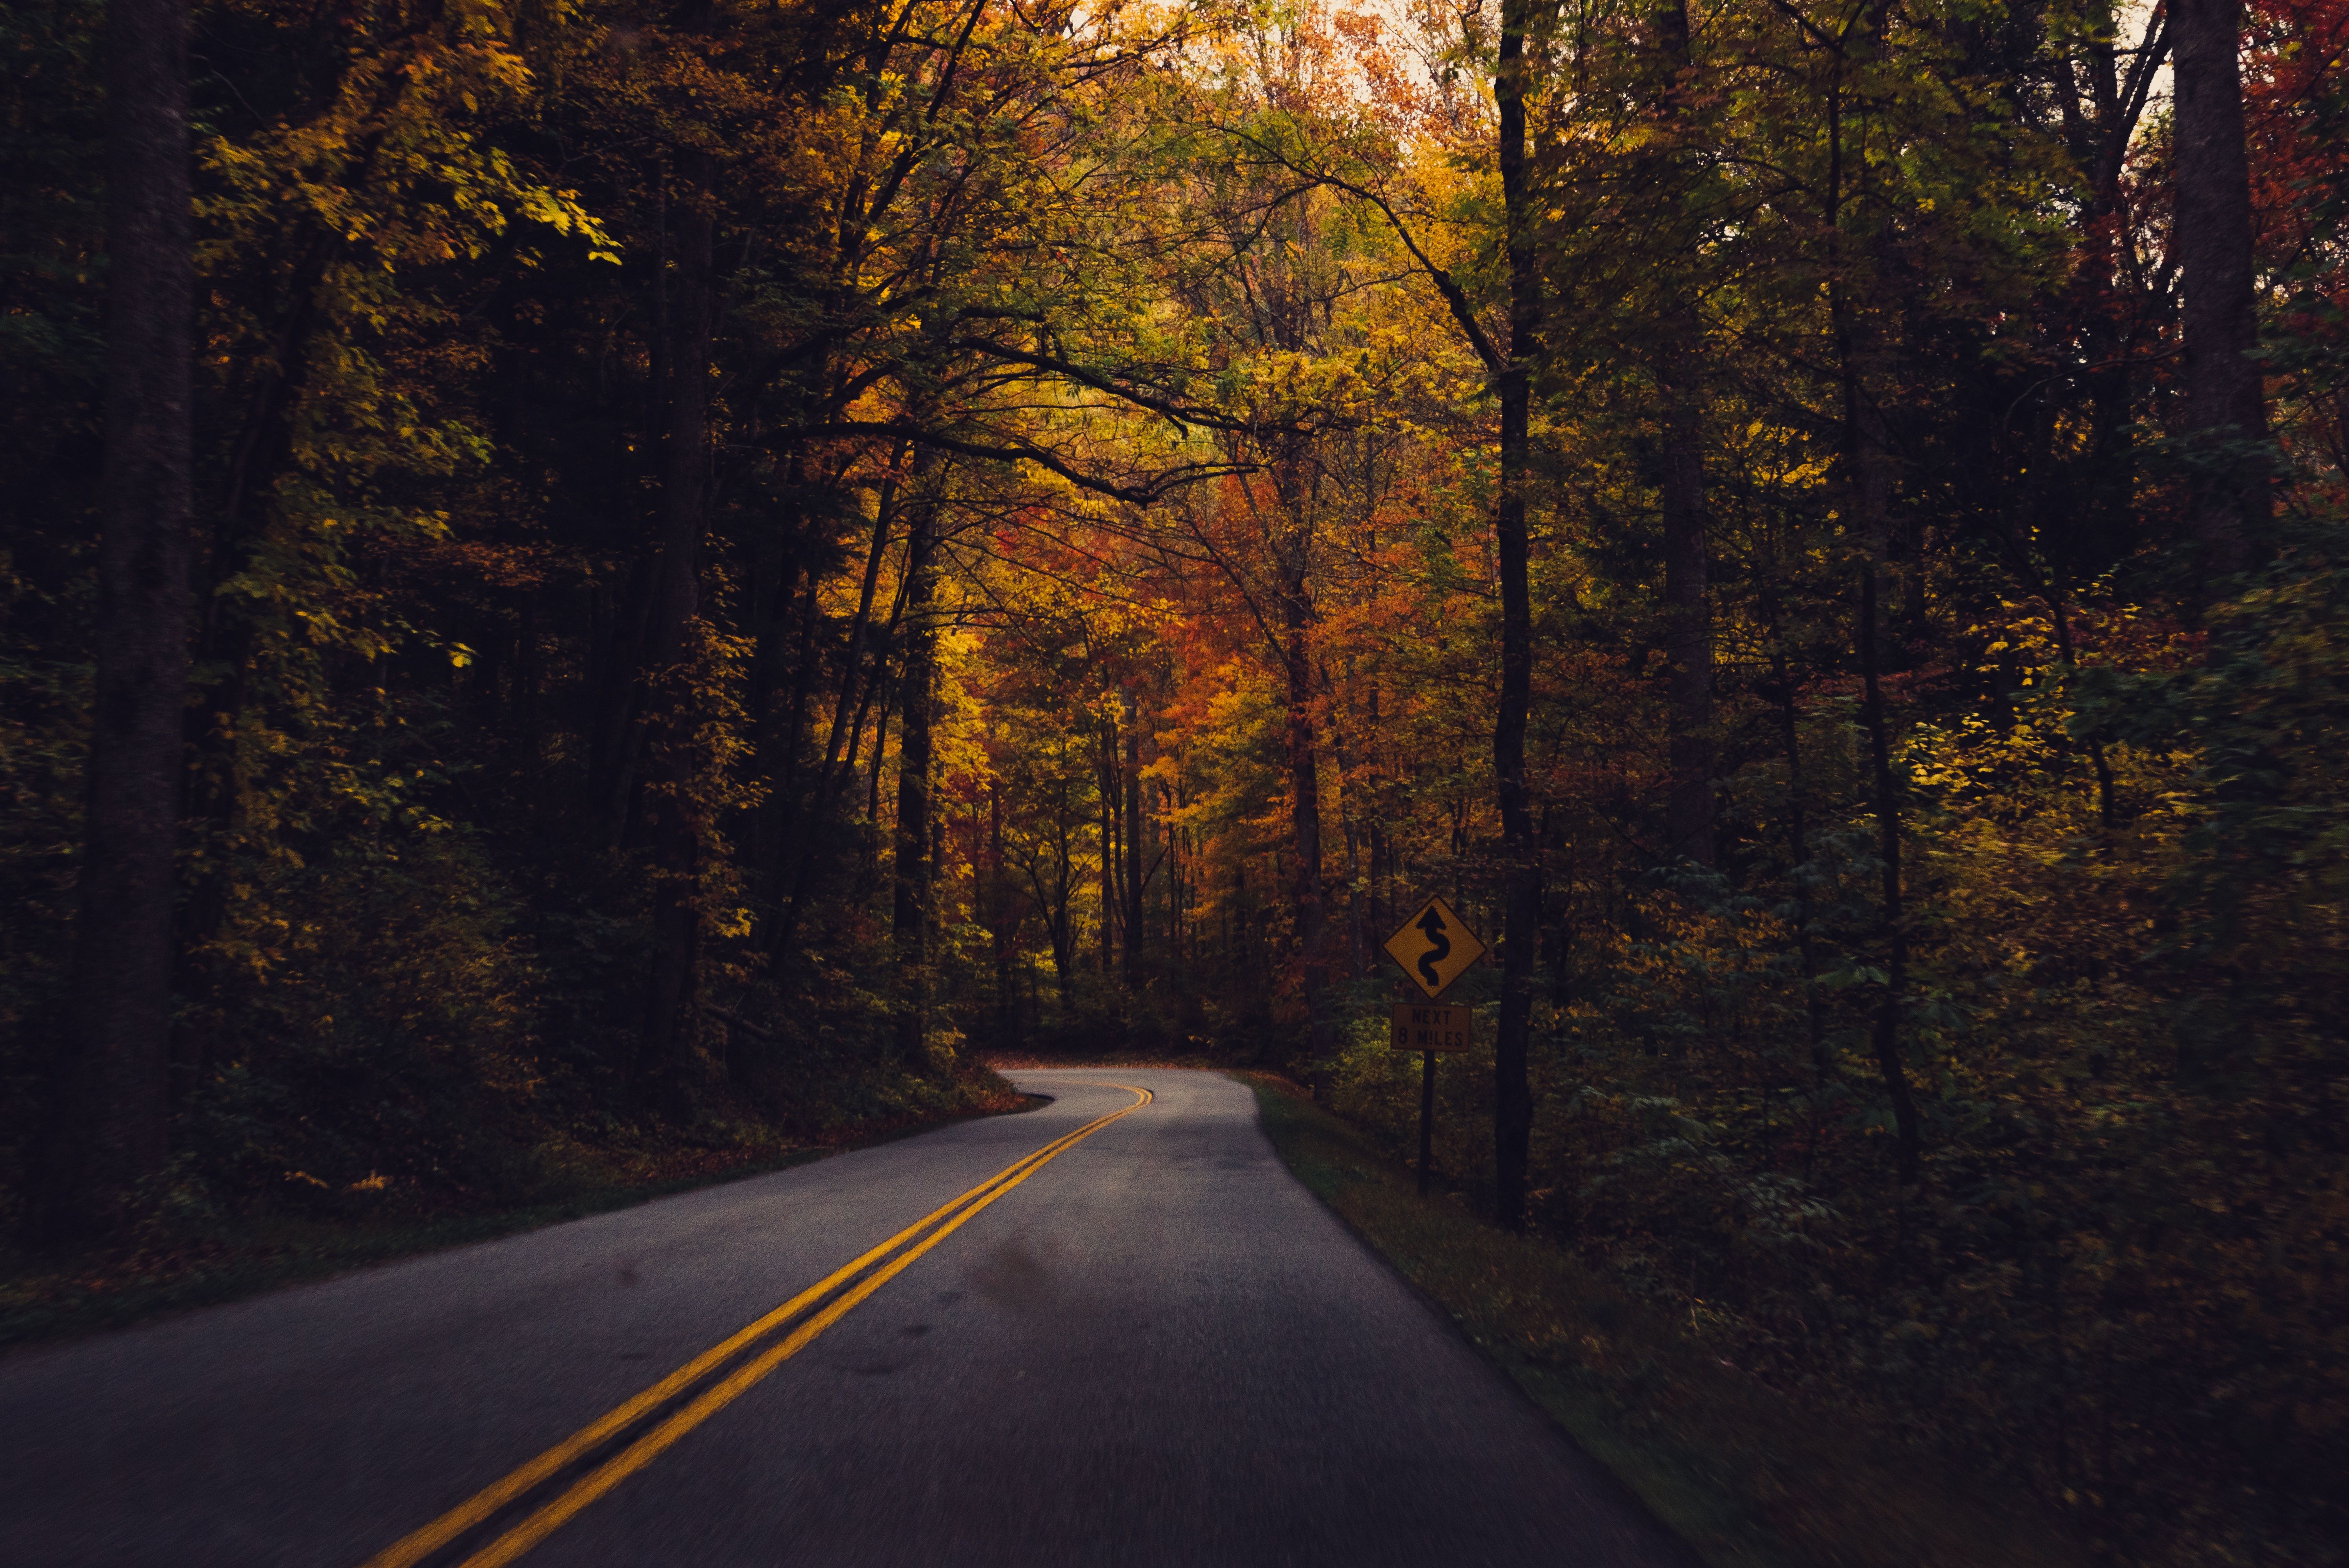 5871x3919 #green, #road line, #yellow, #autumn, #road, #wind, #turn, #street, #curve, #mountain road, #windy road, #tarmac, #wallpaper, # fall, #forest, #fall vibe, #mountainside, #highway, #Free picture, #wood, #tree. Mocah HD Wallpaper